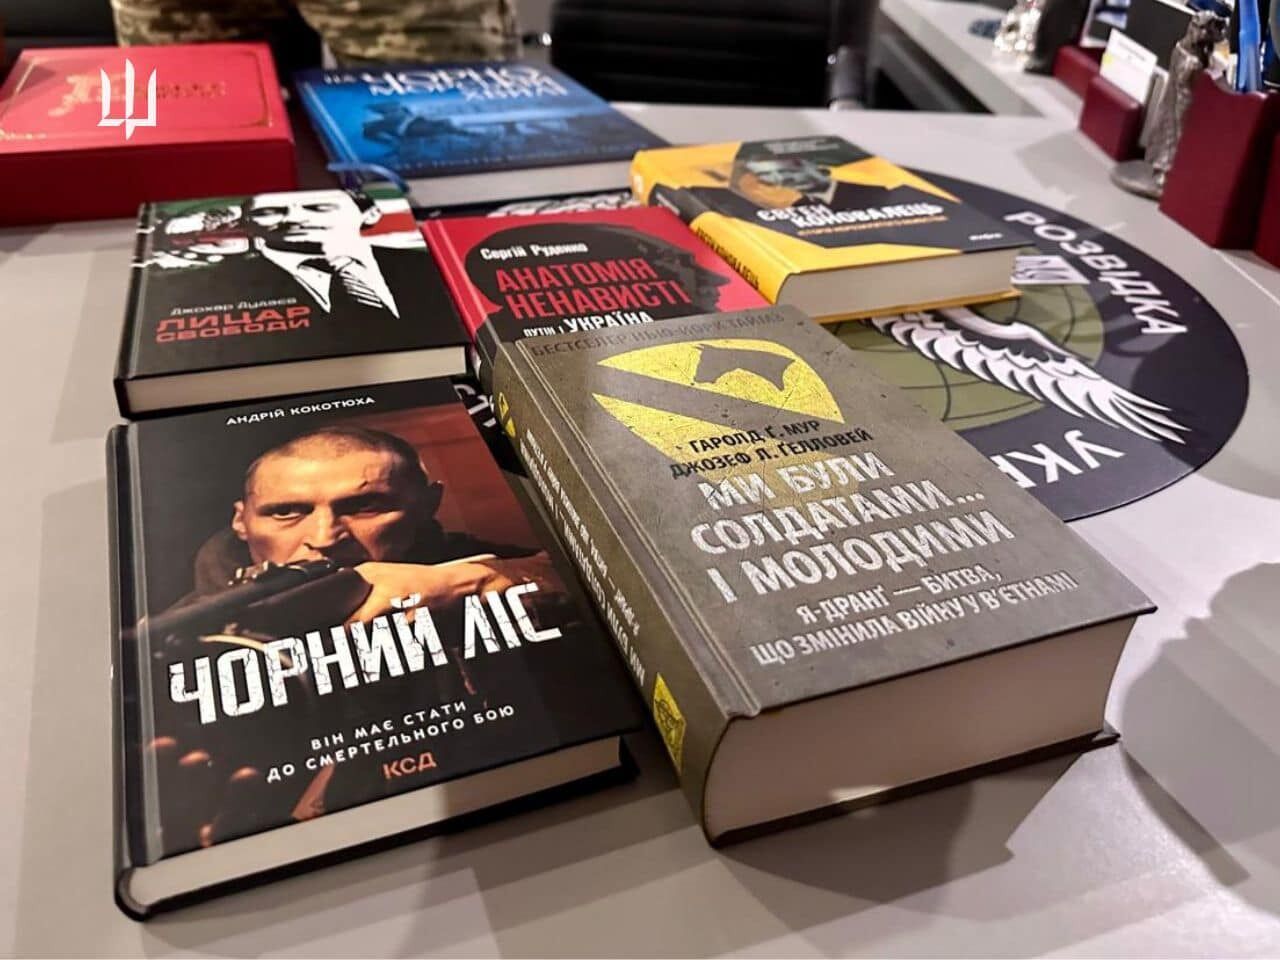 Kyrylo Budanov showed the books he purchased at the Book Arsenal: what the Chief Intelligence Officer of Ukraine reads